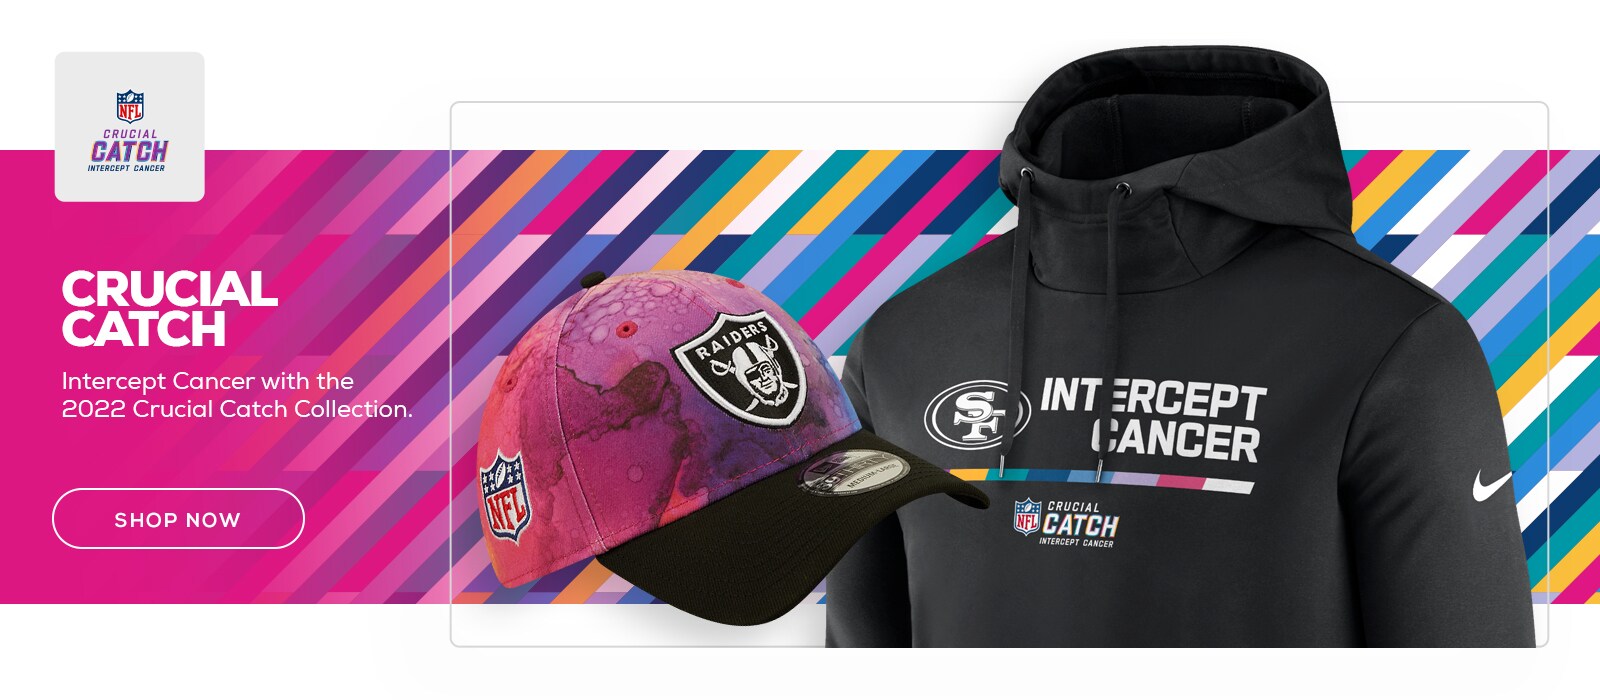 NFL CRUCIAL CATCH. Intercept Cancer with the 2022 Crucial Catch Collection. Shop Now